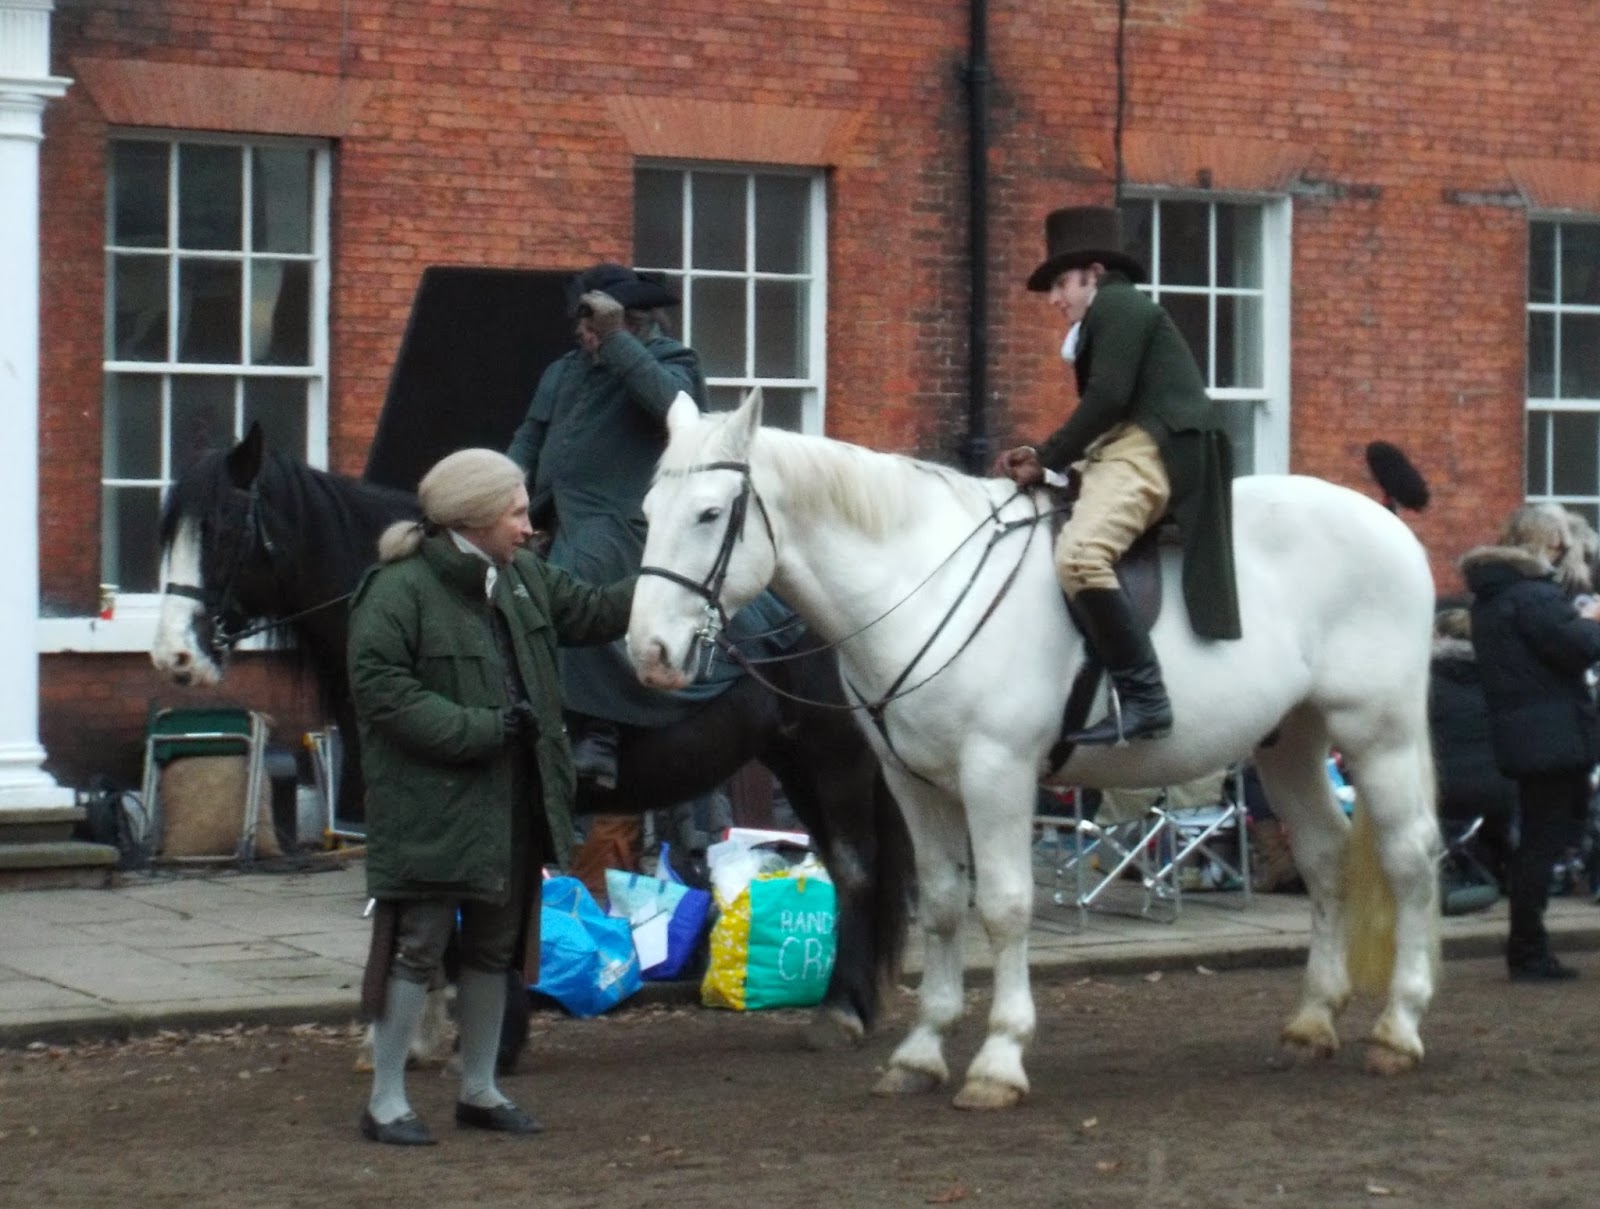 The filming of Jonathan Strange and Mr Norrell